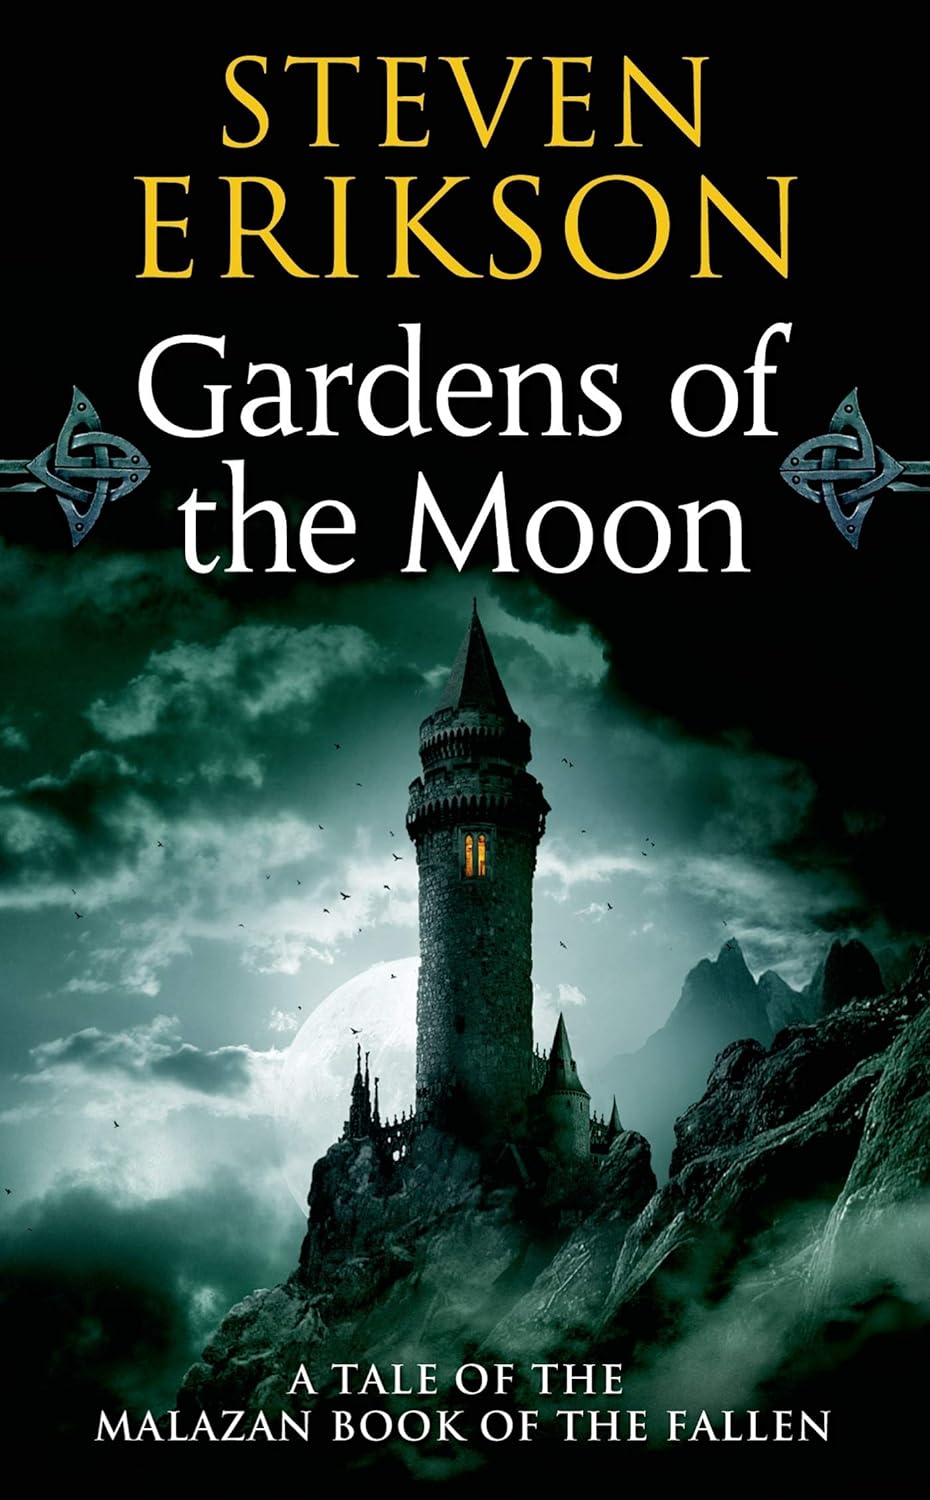 Gardens of the Moon, by Steven Erikson